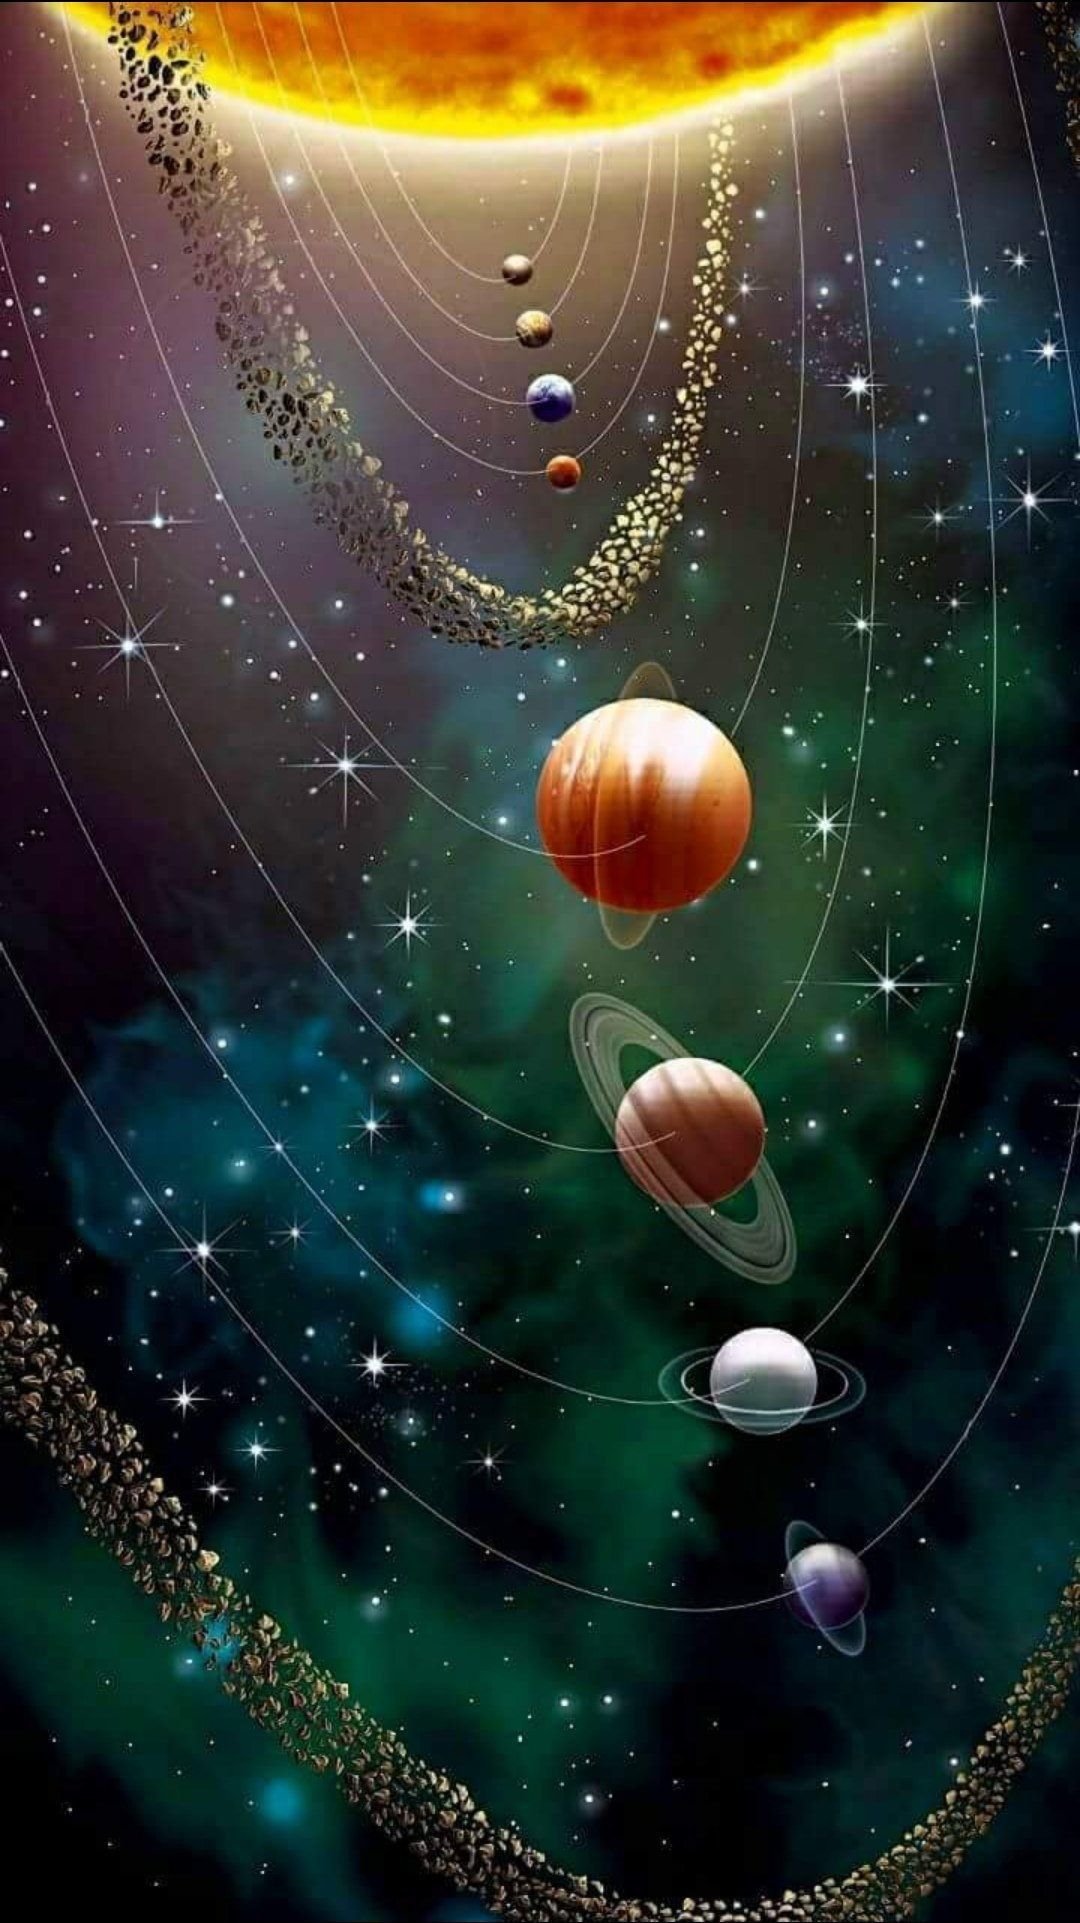 Our Beautiful Solar System. Galaxy wallpaper, Wallpaper earth, Galaxy wallpaper iphone